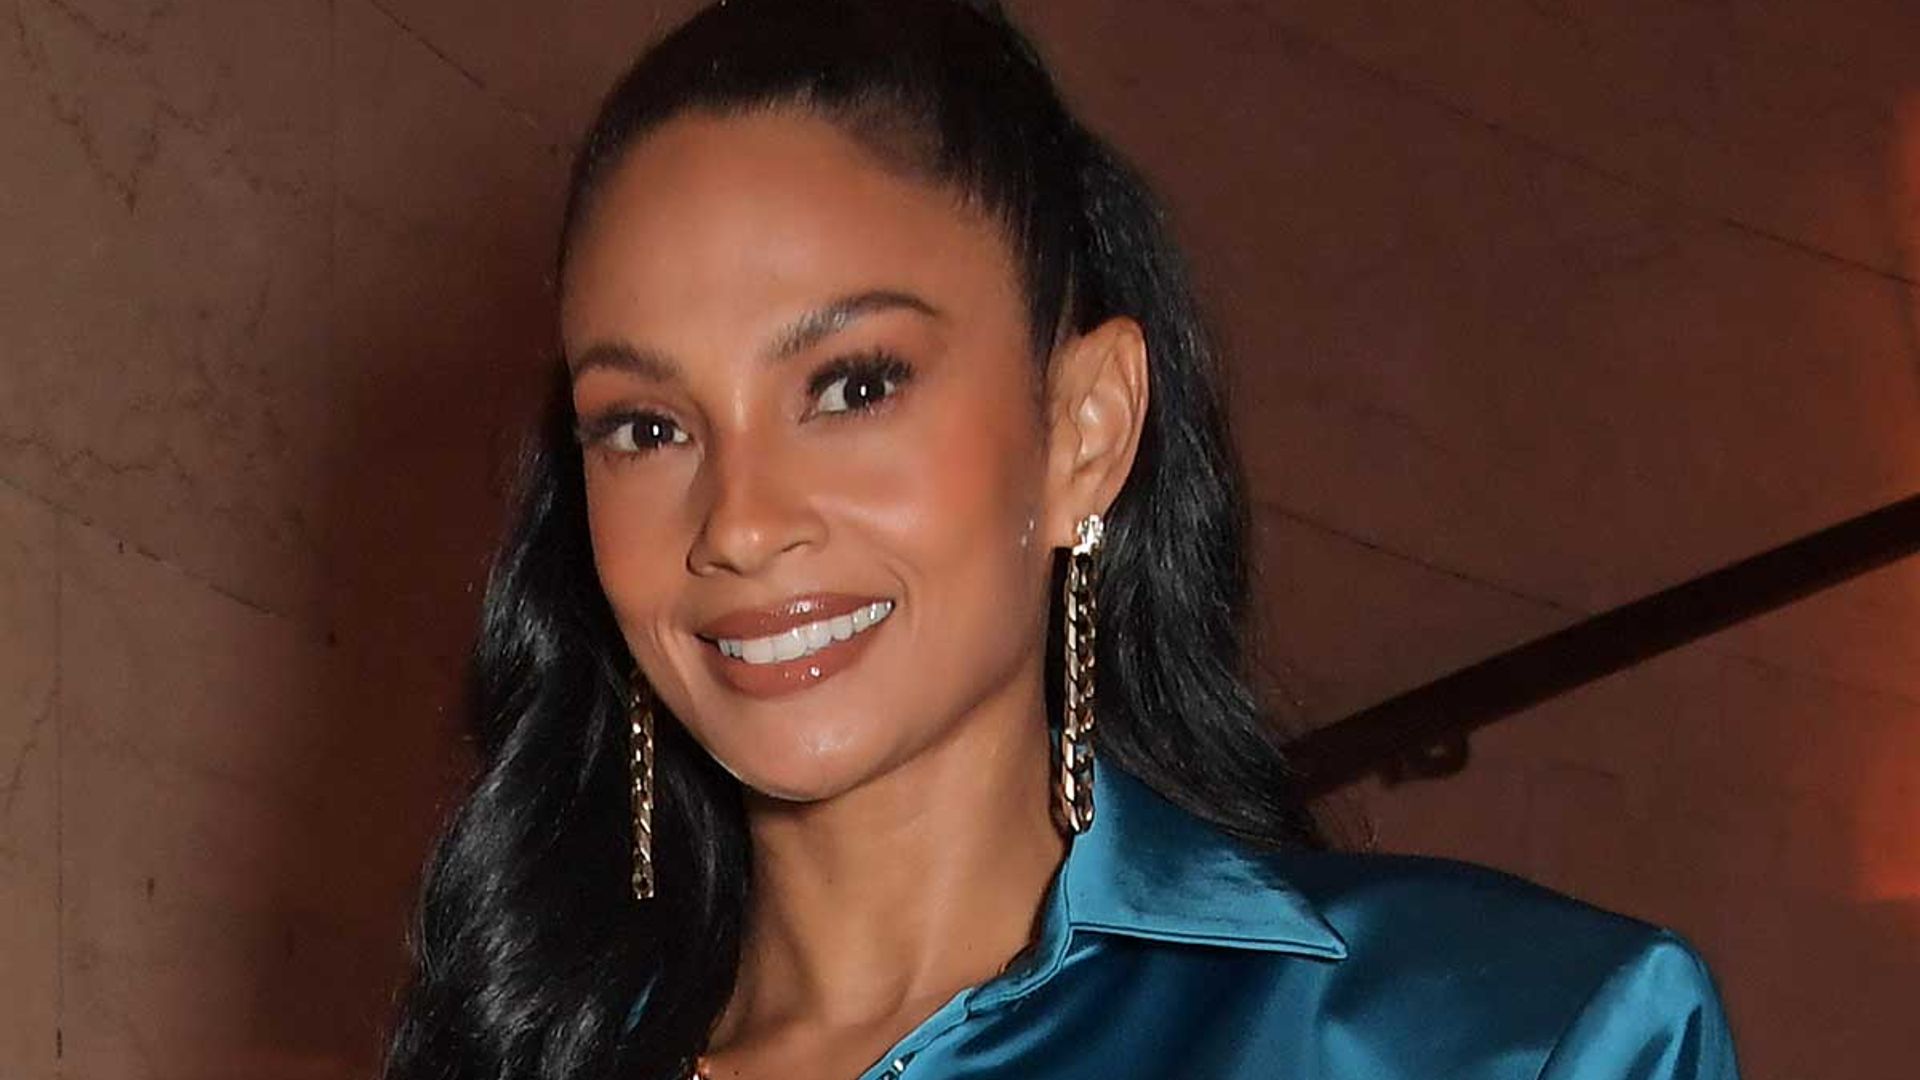 Alesha Dixon wows on the red carpet in see-through dress with